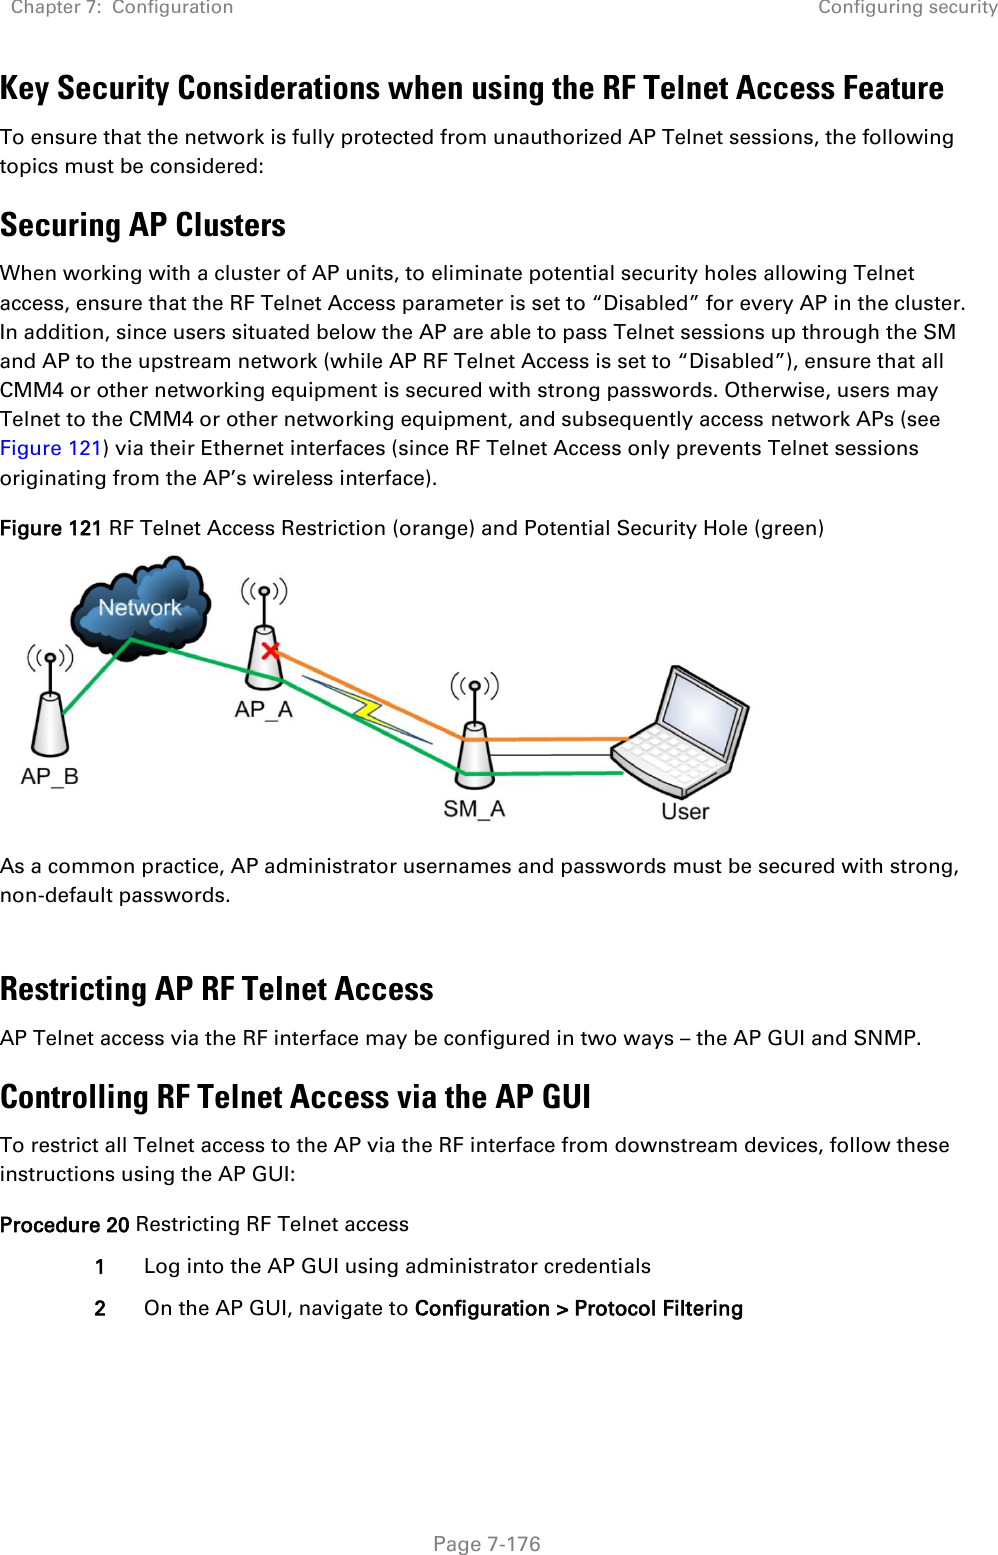 Chapter 7:  Configuration Configuring security   Page 7-176 Key Security Considerations when using the RF Telnet Access Feature To ensure that the network is fully protected from unauthorized AP Telnet sessions, the following topics must be considered: Securing AP Clusters When working with a cluster of AP units, to eliminate potential security holes allowing Telnet access, ensure that the RF Telnet Access parameter is set to “Disabled” for every AP in the cluster. In addition, since users situated below the AP are able to pass Telnet sessions up through the SM and AP to the upstream network (while AP RF Telnet Access is set to “Disabled”), ensure that all CMM4 or other networking equipment is secured with strong passwords. Otherwise, users may Telnet to the CMM4 or other networking equipment, and subsequently access network APs (see Figure 121) via their Ethernet interfaces (since RF Telnet Access only prevents Telnet sessions originating from the AP’s wireless interface). Figure 121 RF Telnet Access Restriction (orange) and Potential Security Hole (green)  As a common practice, AP administrator usernames and passwords must be secured with strong, non-default passwords.   Restricting AP RF Telnet Access AP Telnet access via the RF interface may be configured in two ways – the AP GUI and SNMP. Controlling RF Telnet Access via the AP GUI To restrict all Telnet access to the AP via the RF interface from downstream devices, follow these instructions using the AP GUI: Procedure 20 Restricting RF Telnet access 1 Log into the AP GUI using administrator credentials 2 On the AP GUI, navigate to Configuration &gt; Protocol Filtering 